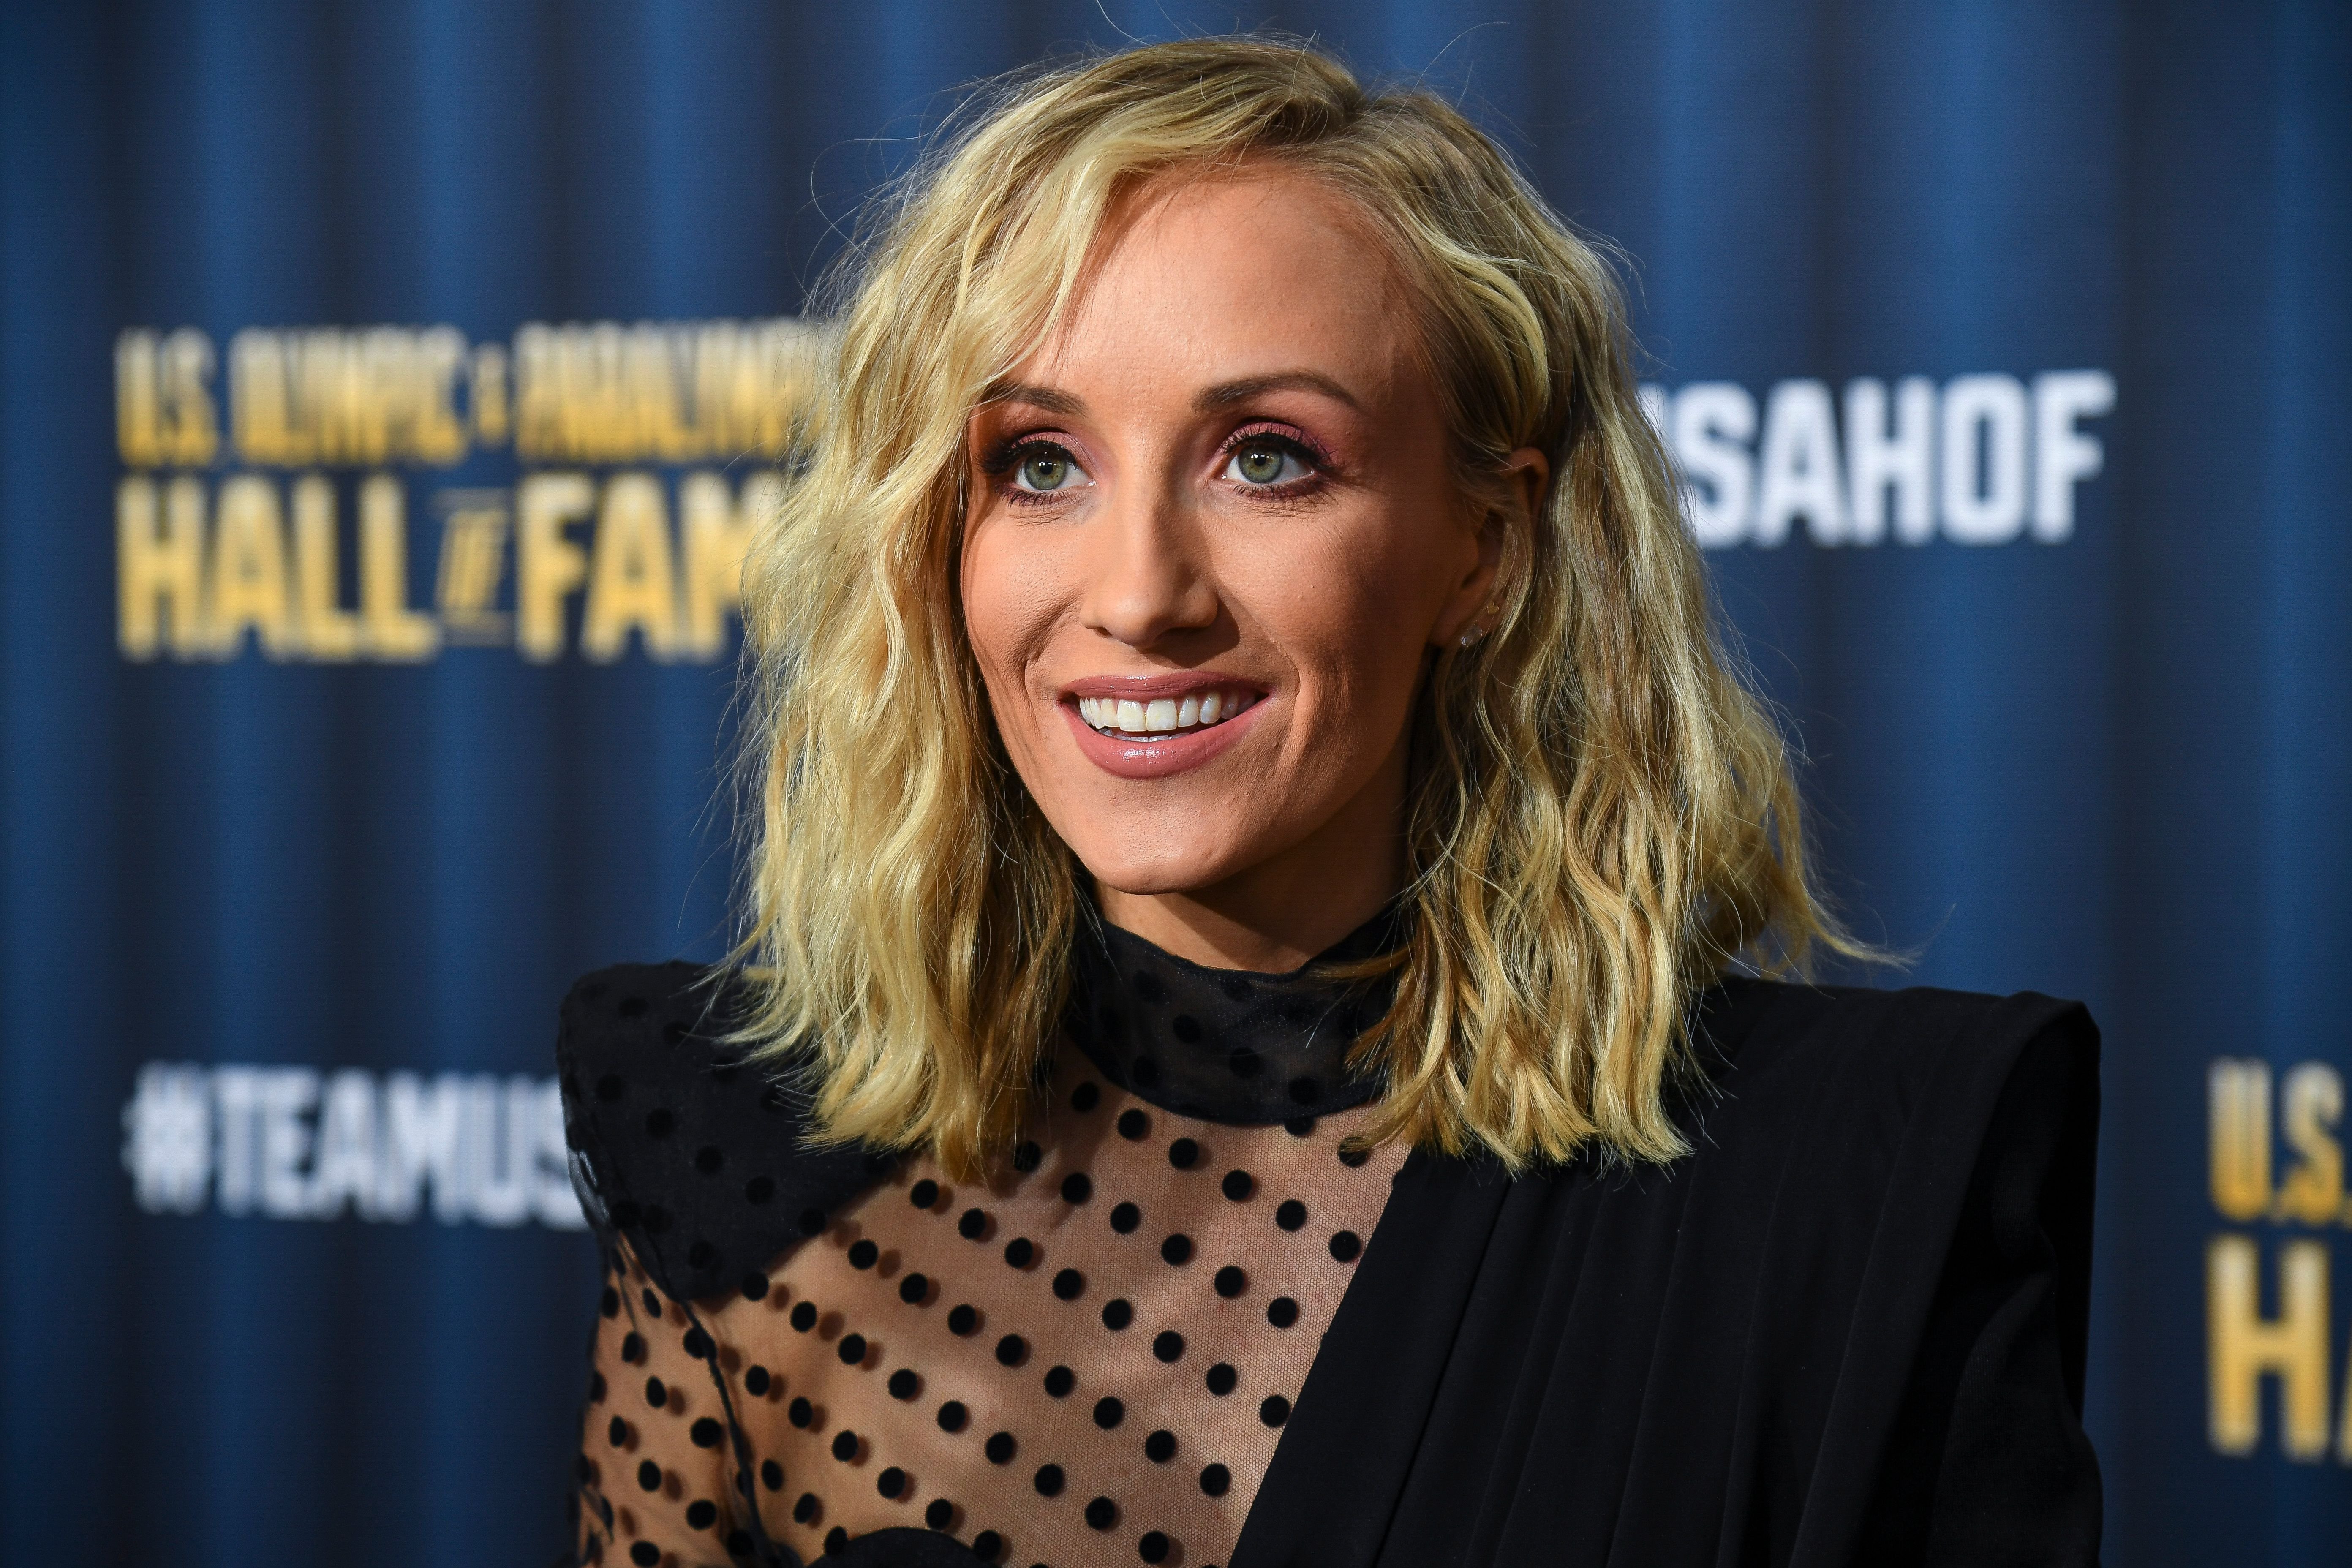 Nastia Liukin talks to the media on the red carpet before the U.S. Olympic Hall of Fame Class of 2019 Induction Ceremony on November 1, 2019 | Photo: Getty Images